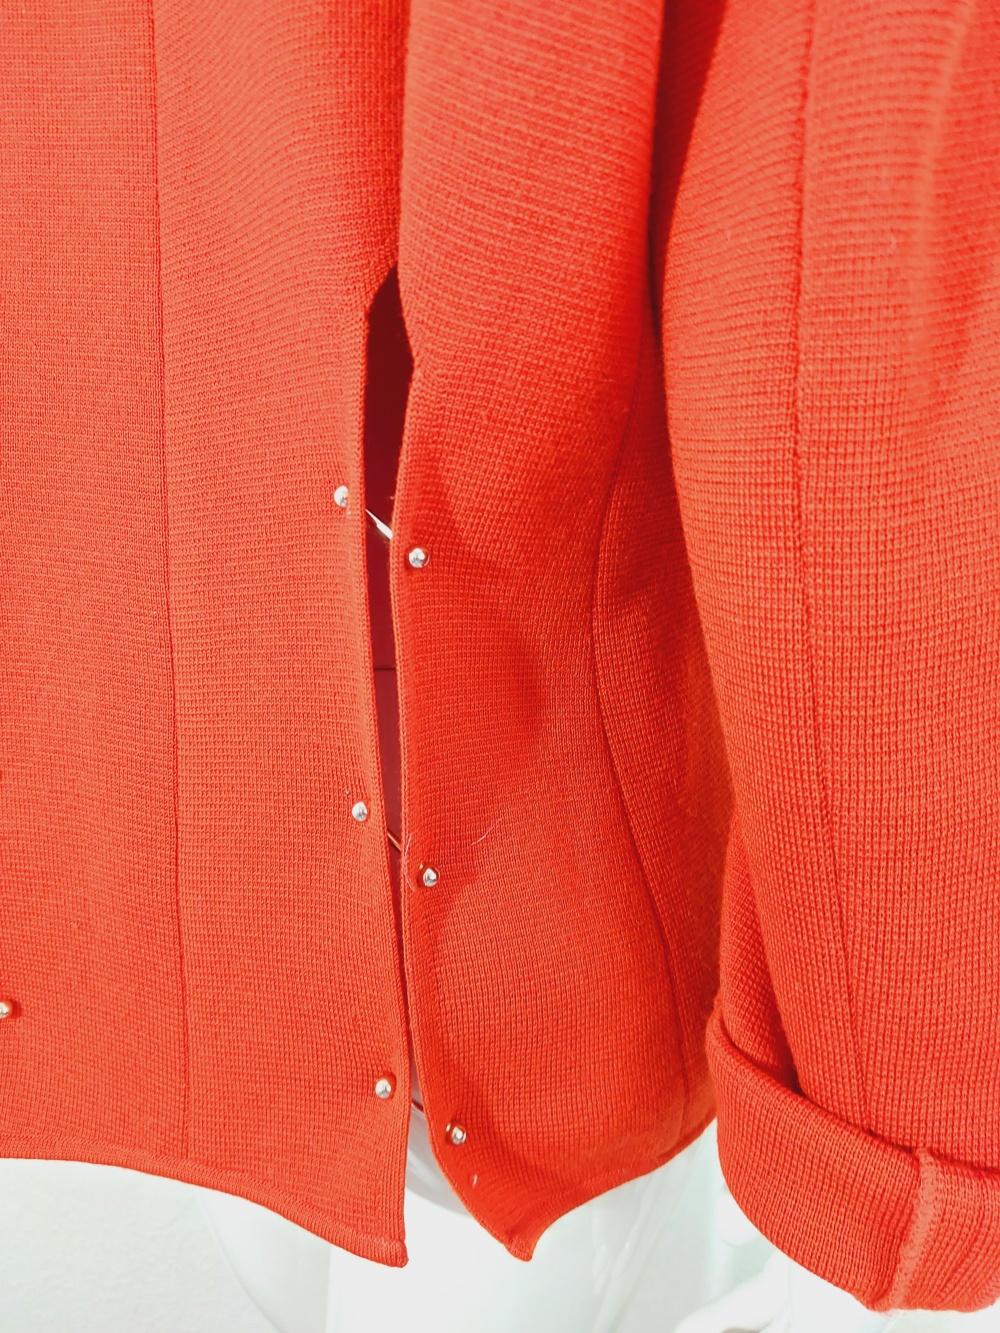 Issey Miyake Pleats Please Red Piercing Punk Deconstructed Rivet Coat Jacket In Good Condition For Sale In PARIS, FR